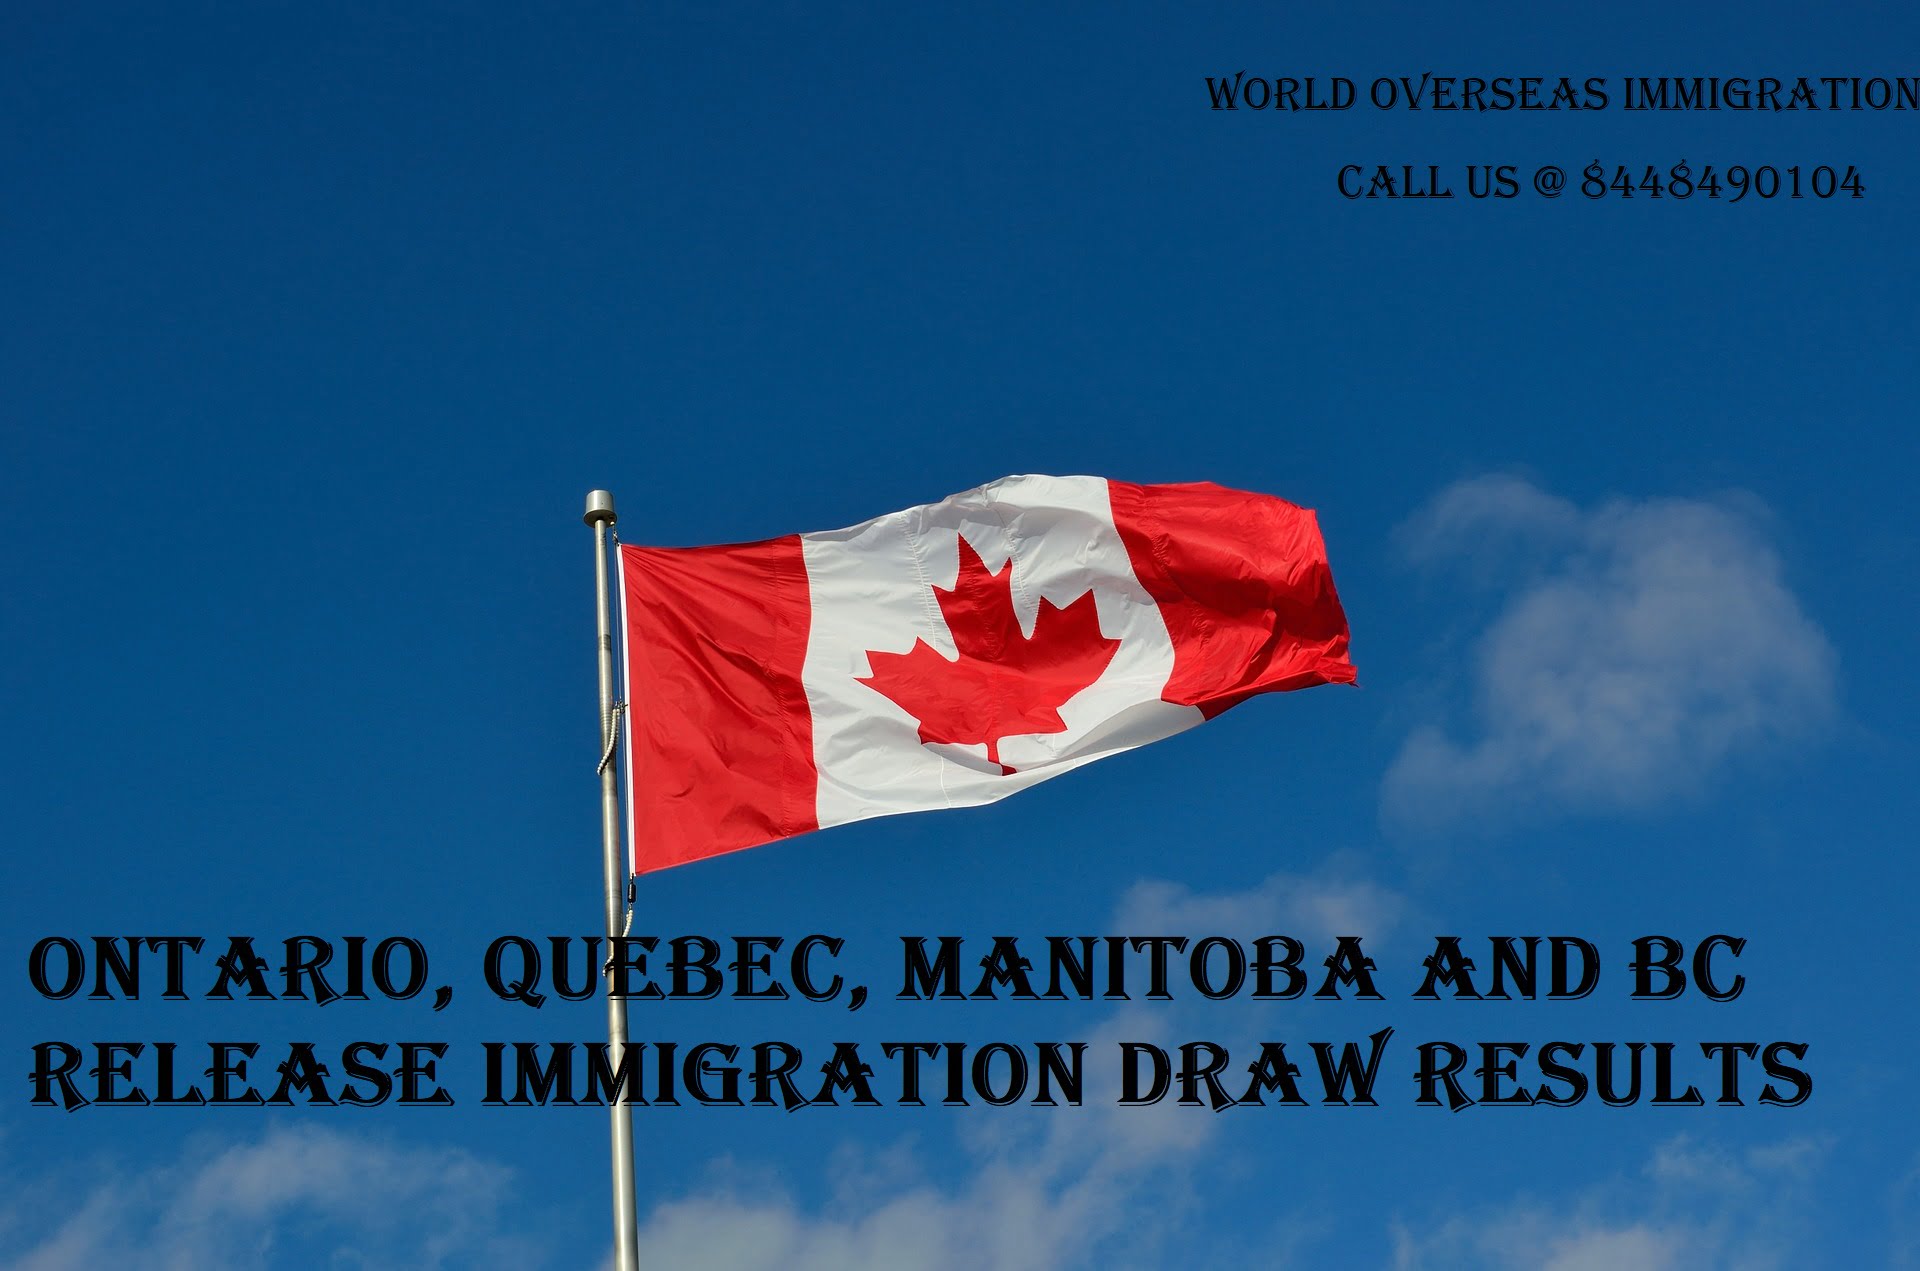 Ontario, Quebec, Manitoba and BC release immigration draw results